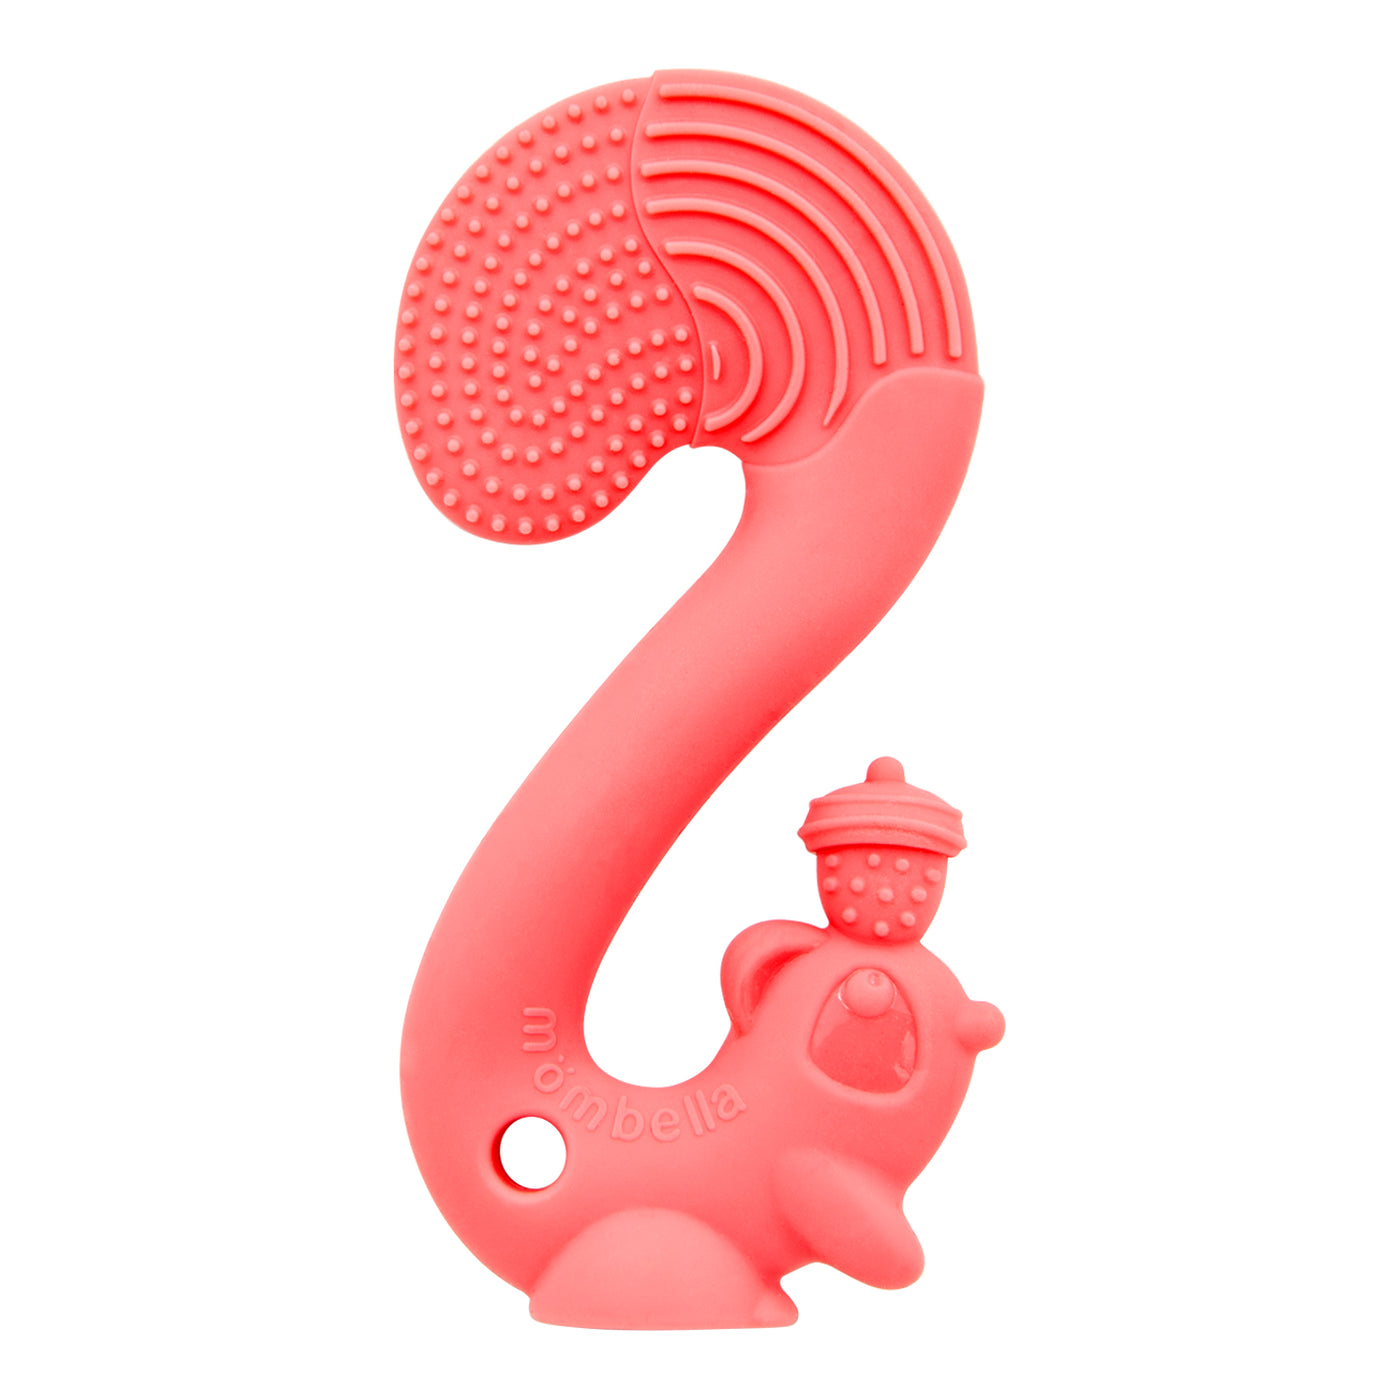 Mombella Squirrel Teether Toy For 6 Month+ Baby Original Design - mombella